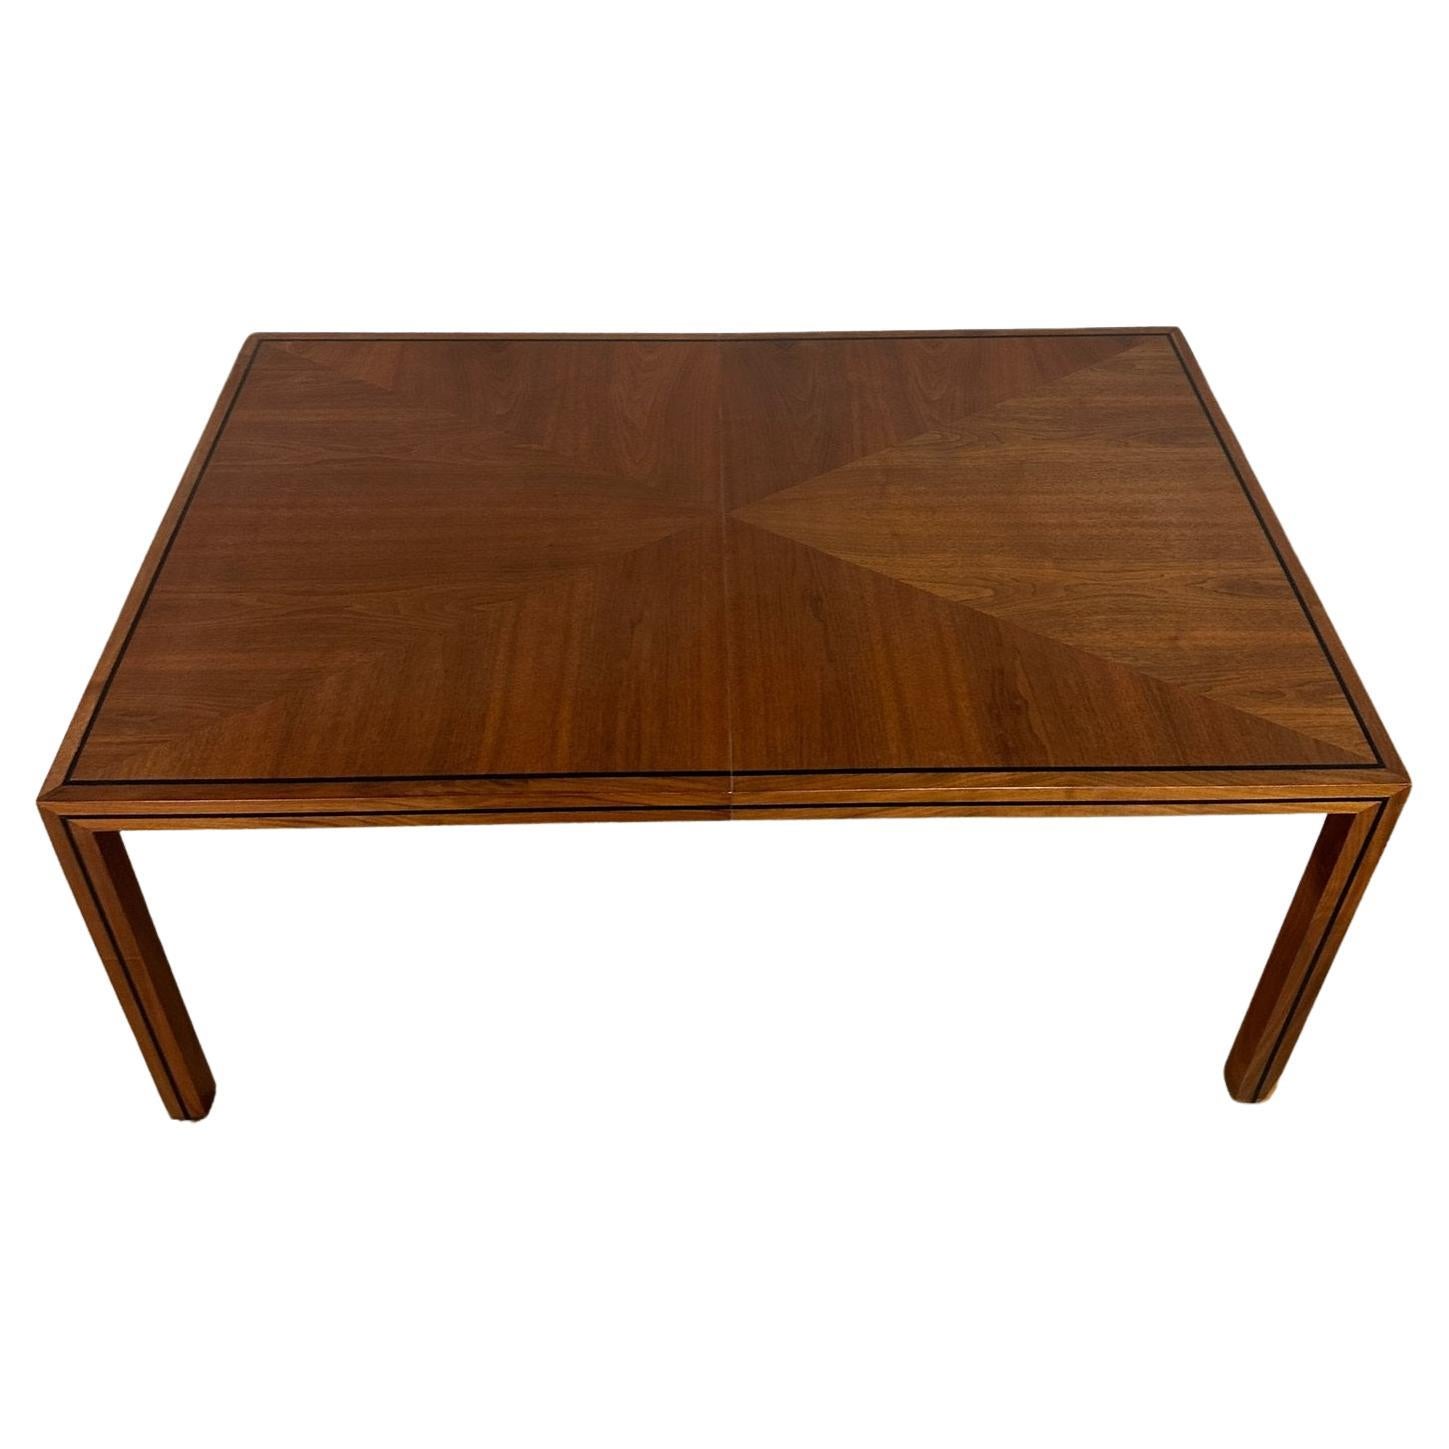 W66 W106 D41 H29 KC26.5 LEAF W20 (2)

Minimal walnut dining table by Dillingham. Item feautres a clean minimal deisgn, contrasting grain, inlaid black laminate detail, and two large extensions. Table shows well with no major areas of wear. Item is